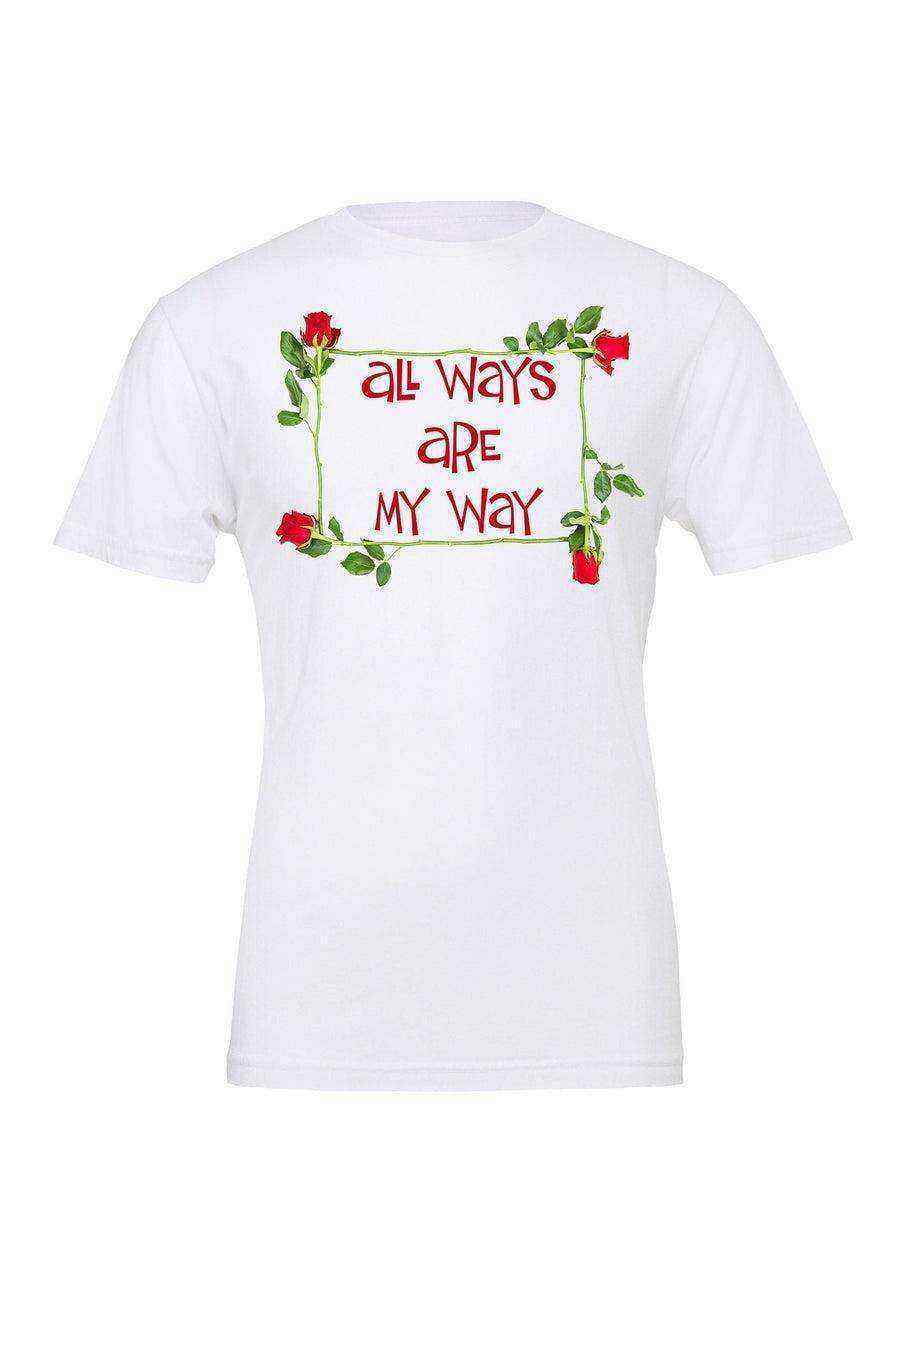 All Ways Are My Way Shirt | Queen Of Hearts Shirt - Dylan's Tees